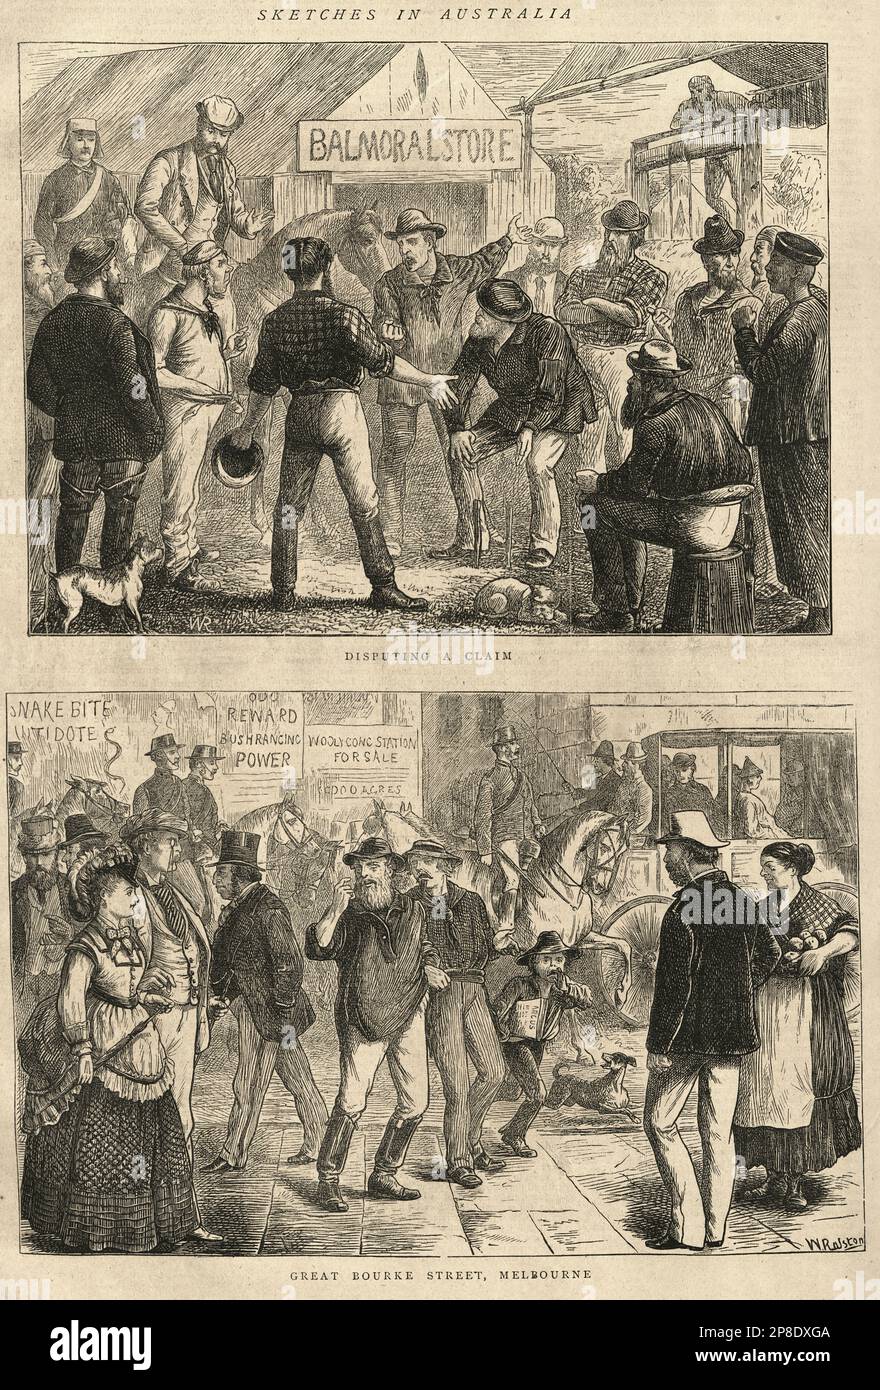 Vintage illustration Sketches from Australia, Miners disputing a gold claim, Great Bourne Street Melbourne, 1870s, 19th Century Stock Photo